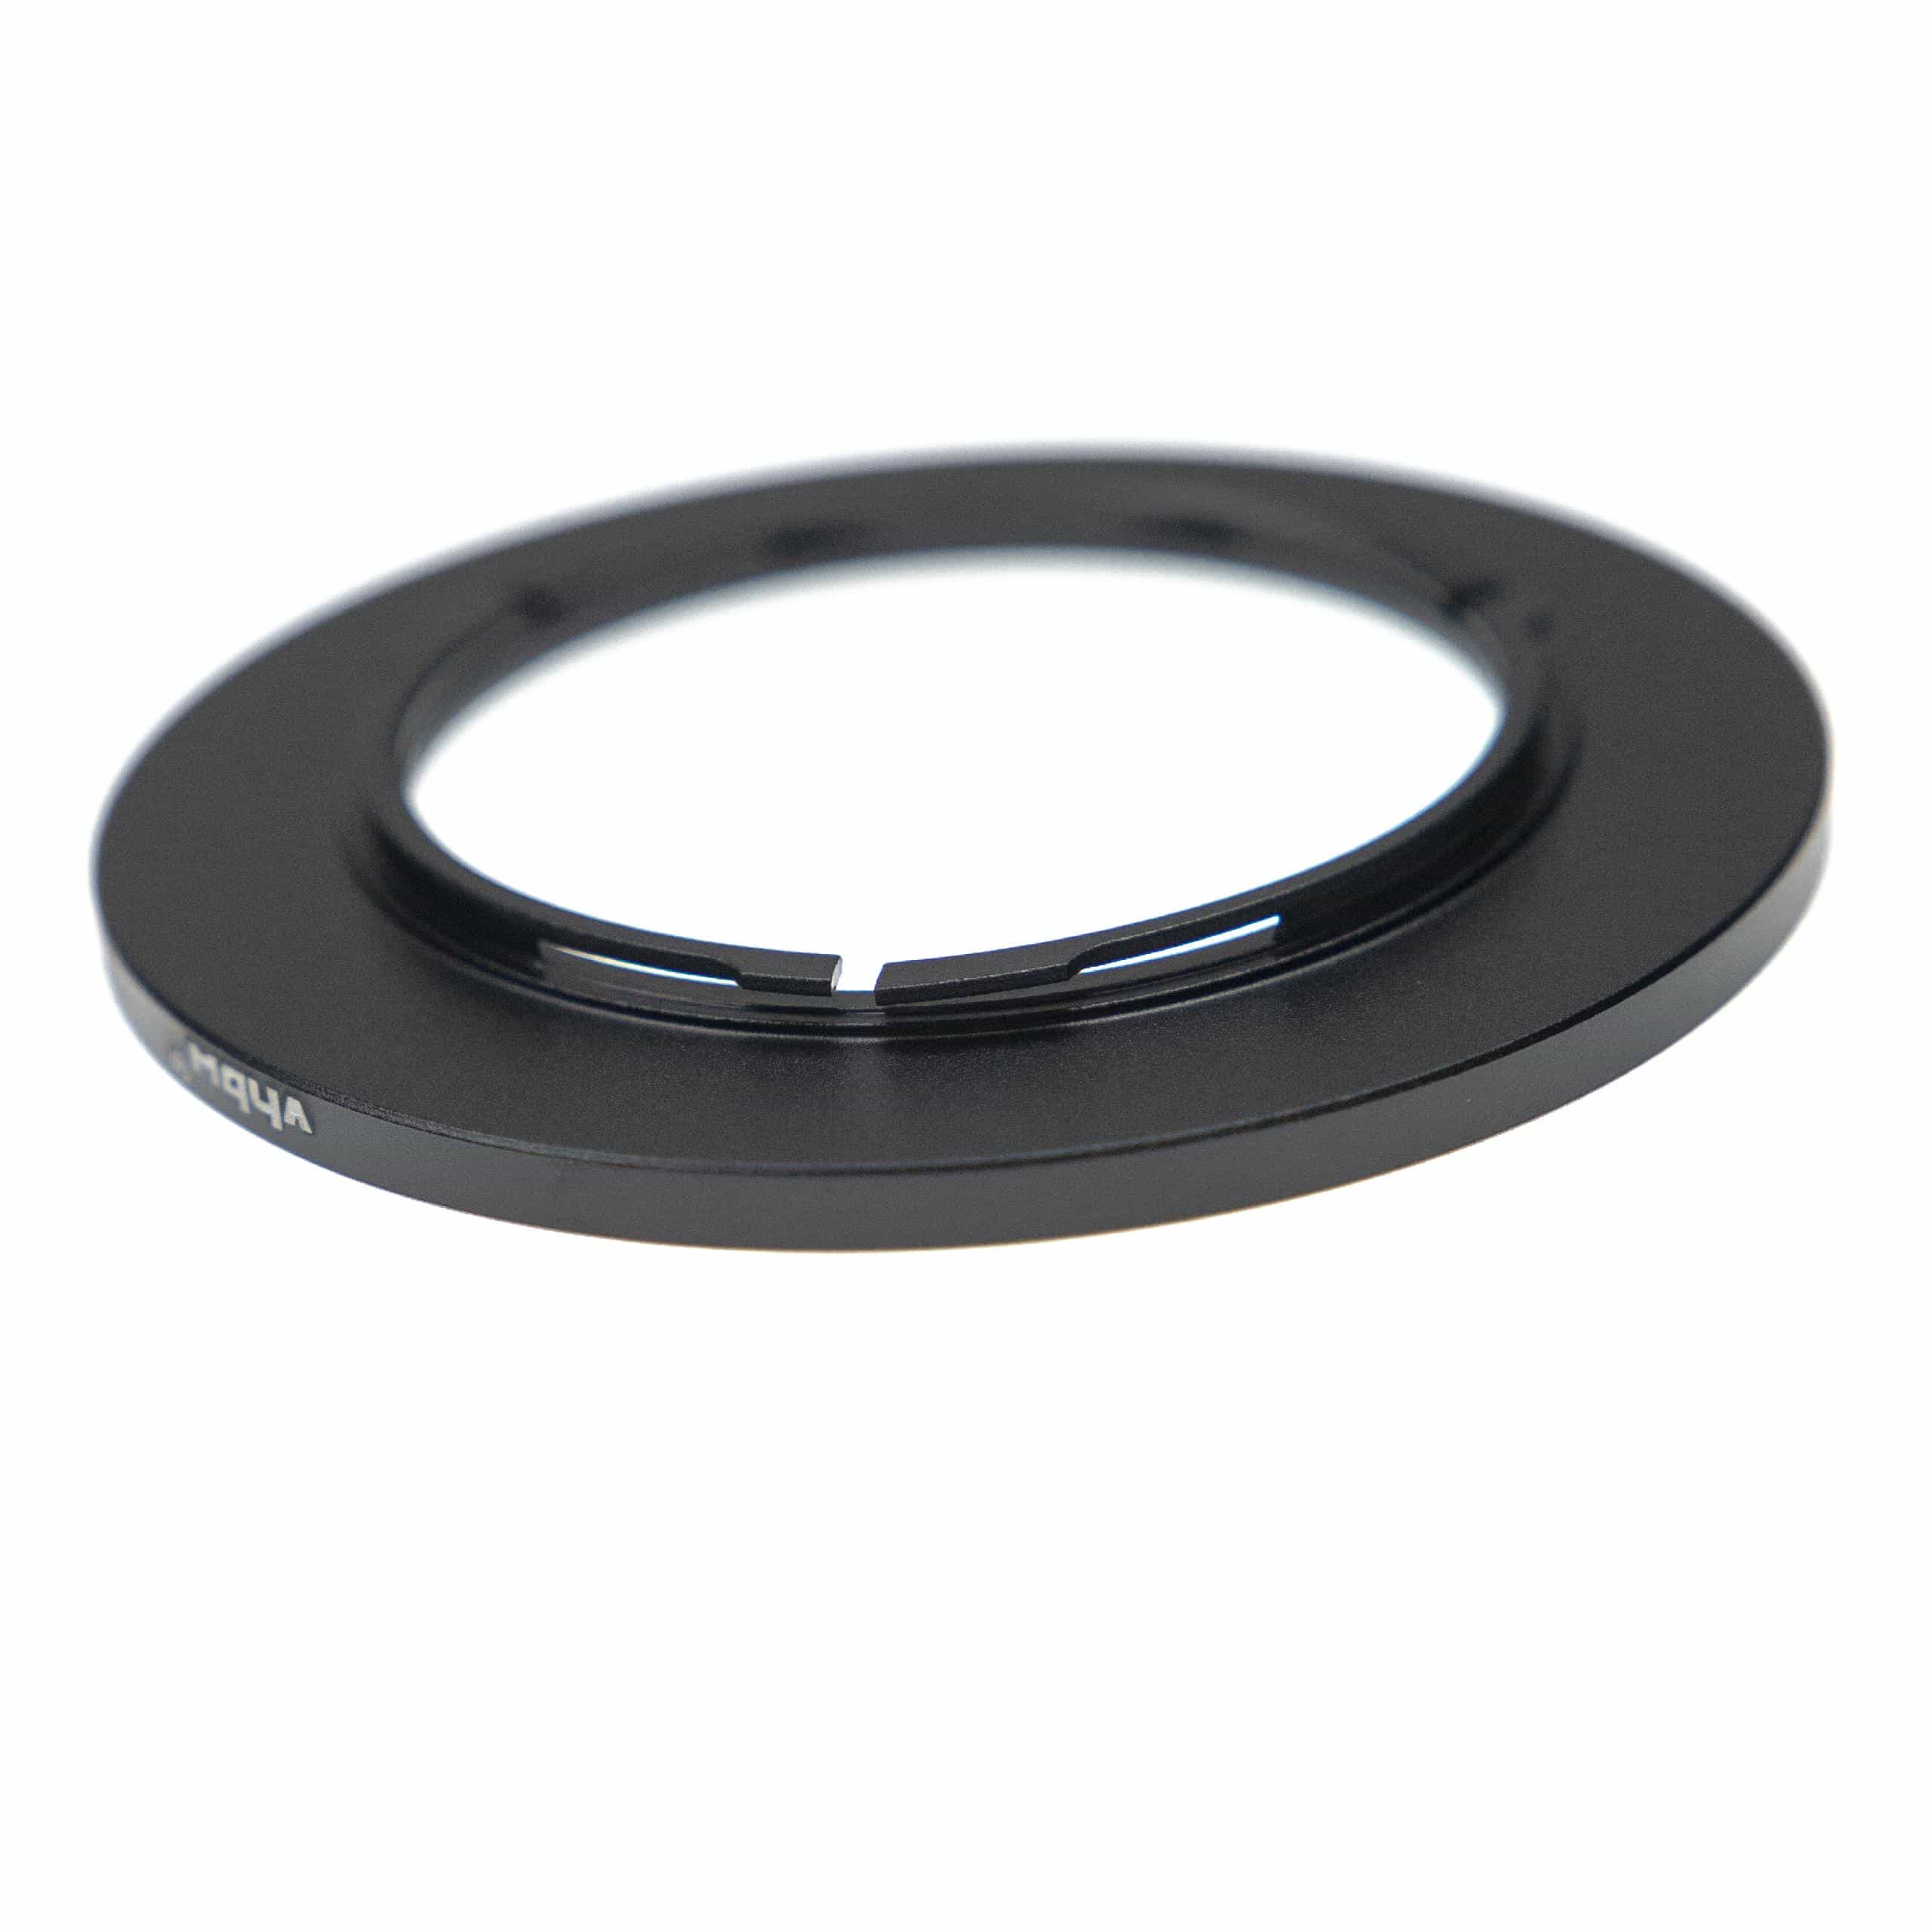 77 mm Filter Adapter suitable for Hasselblad B50 bayonet Camera Lens